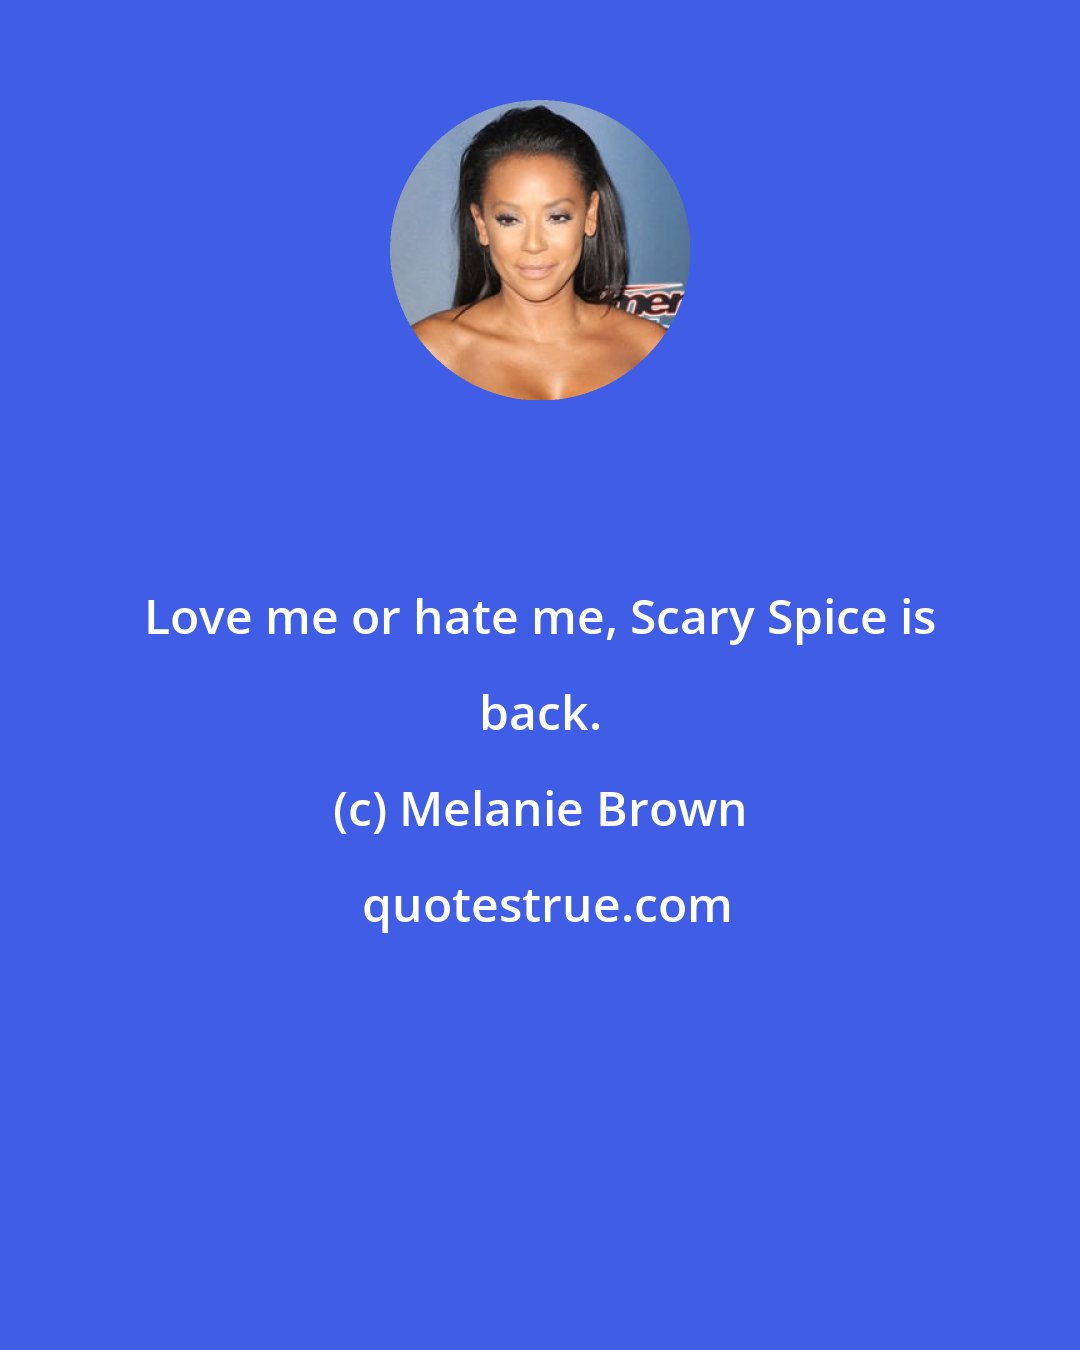 Melanie Brown: Love me or hate me, Scary Spice is back.